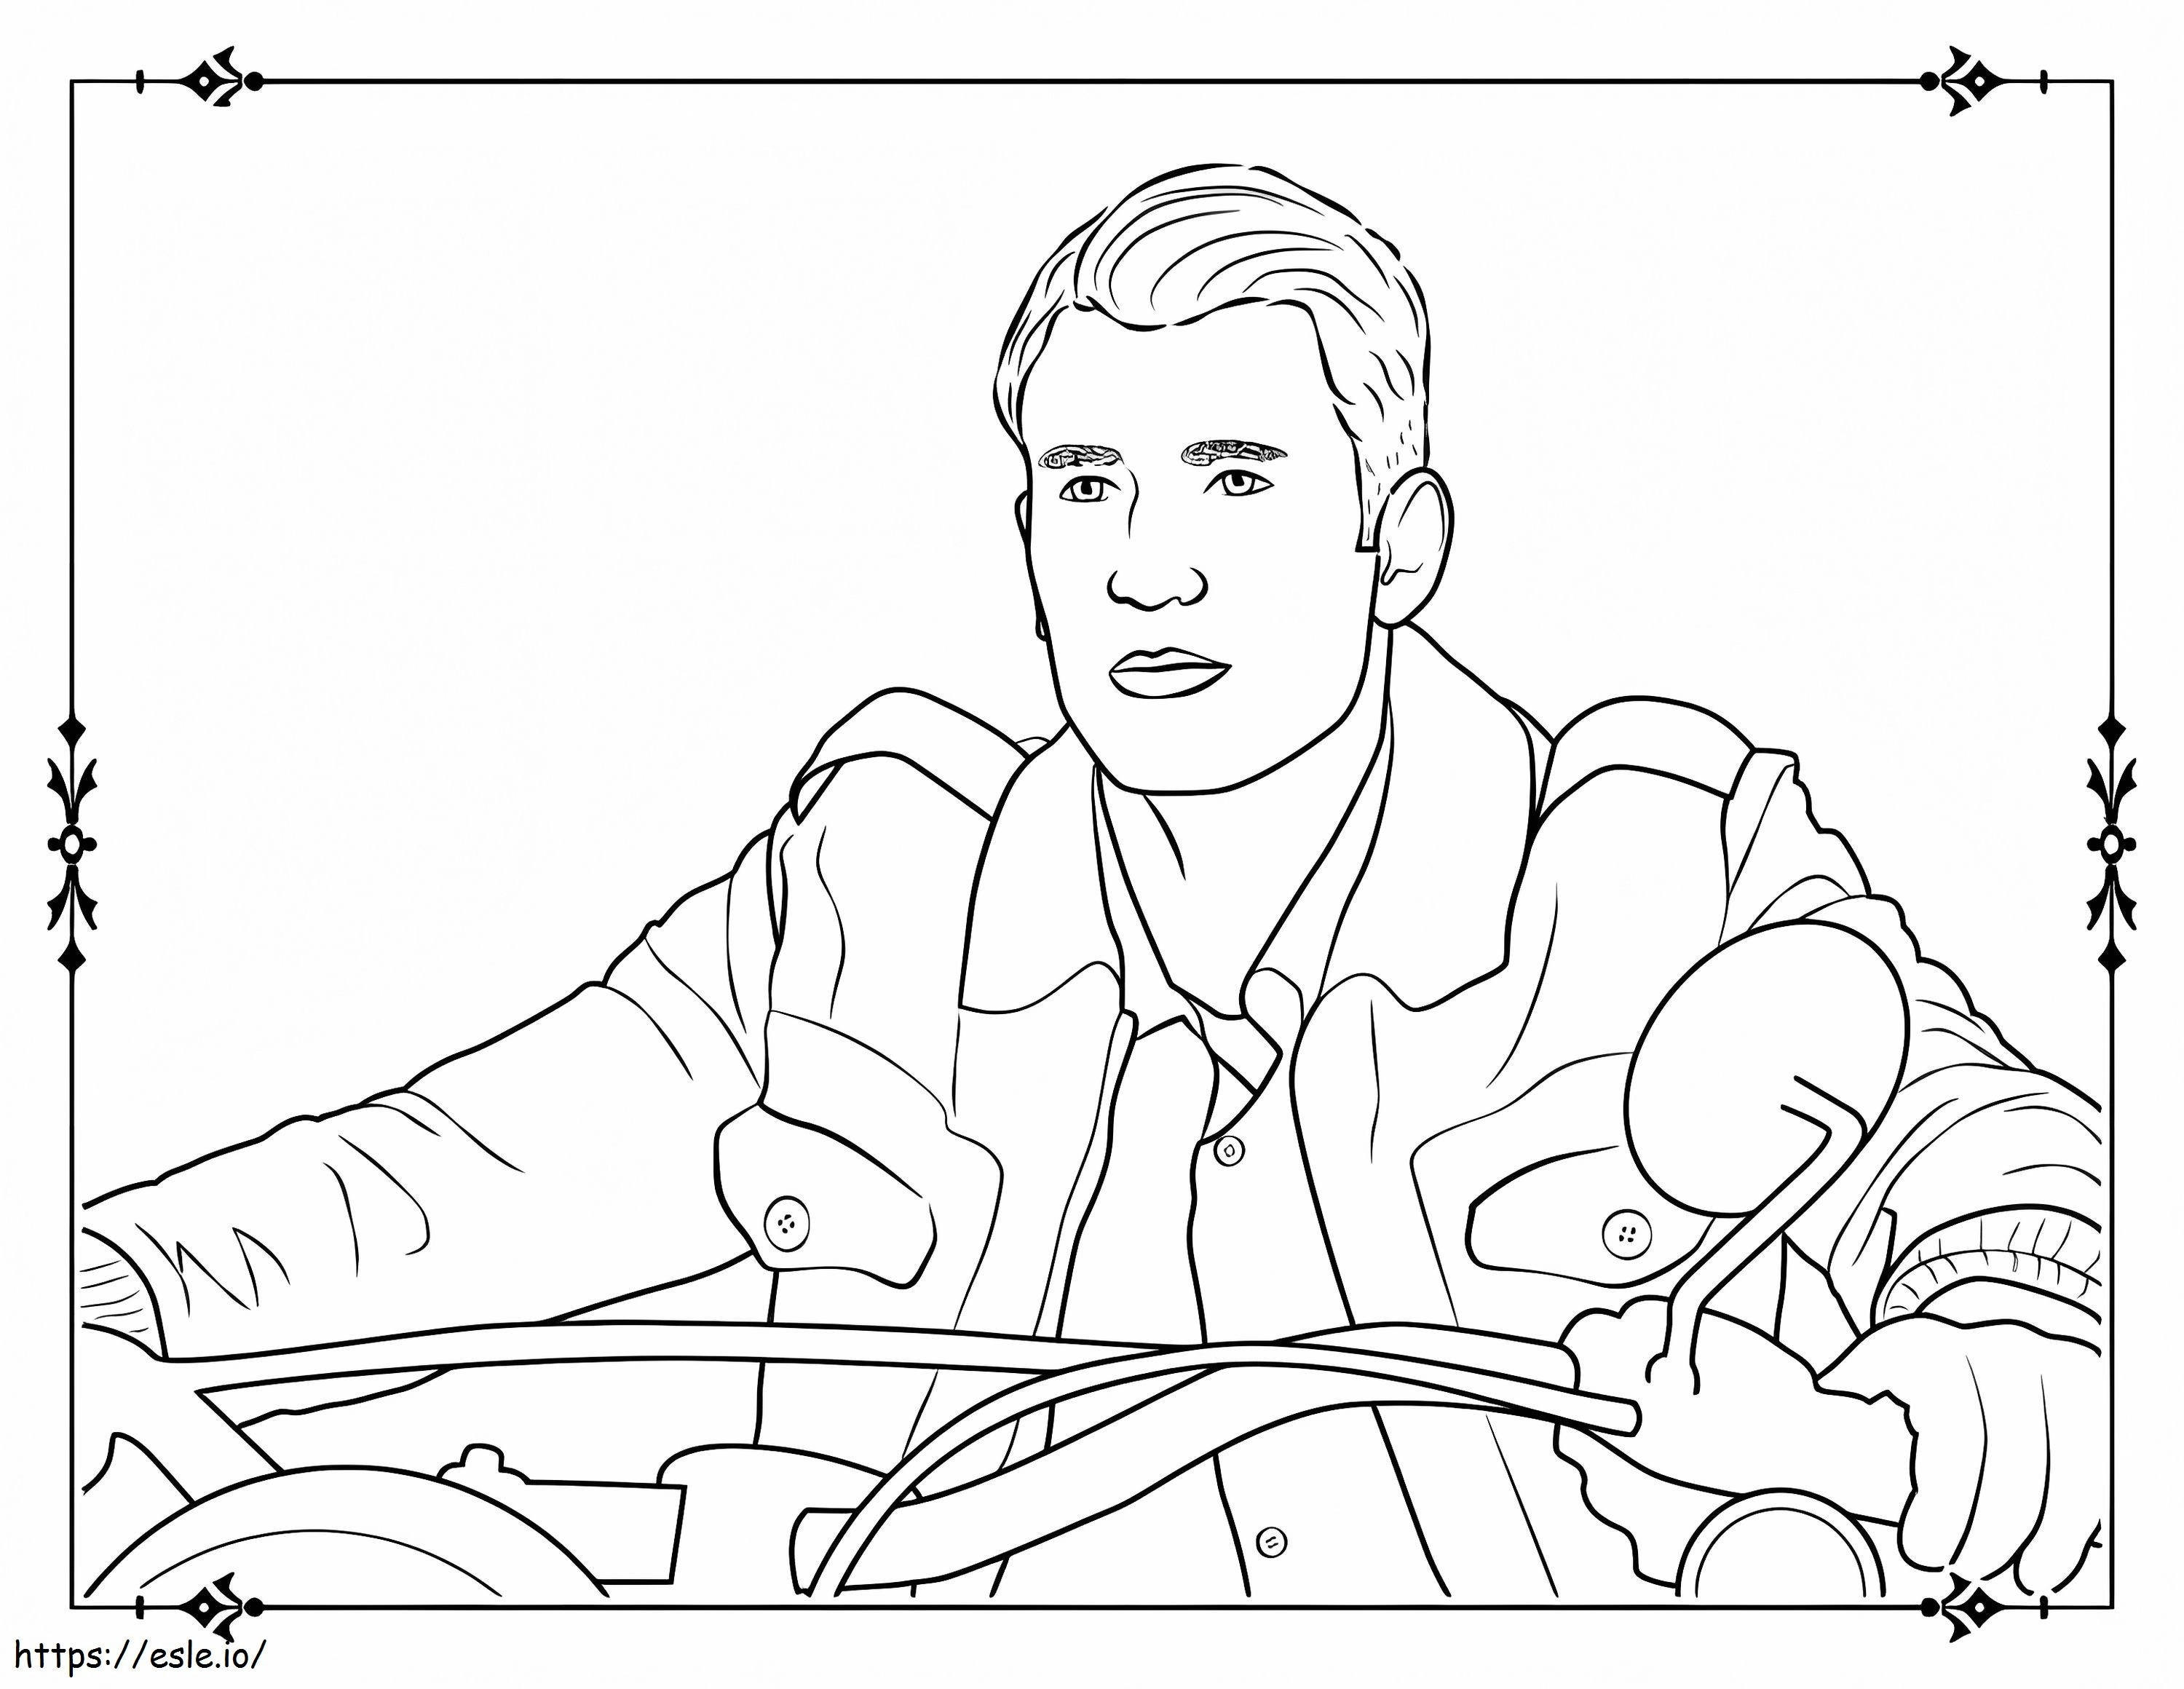 Chris Evans Riding Motorcycle coloring page